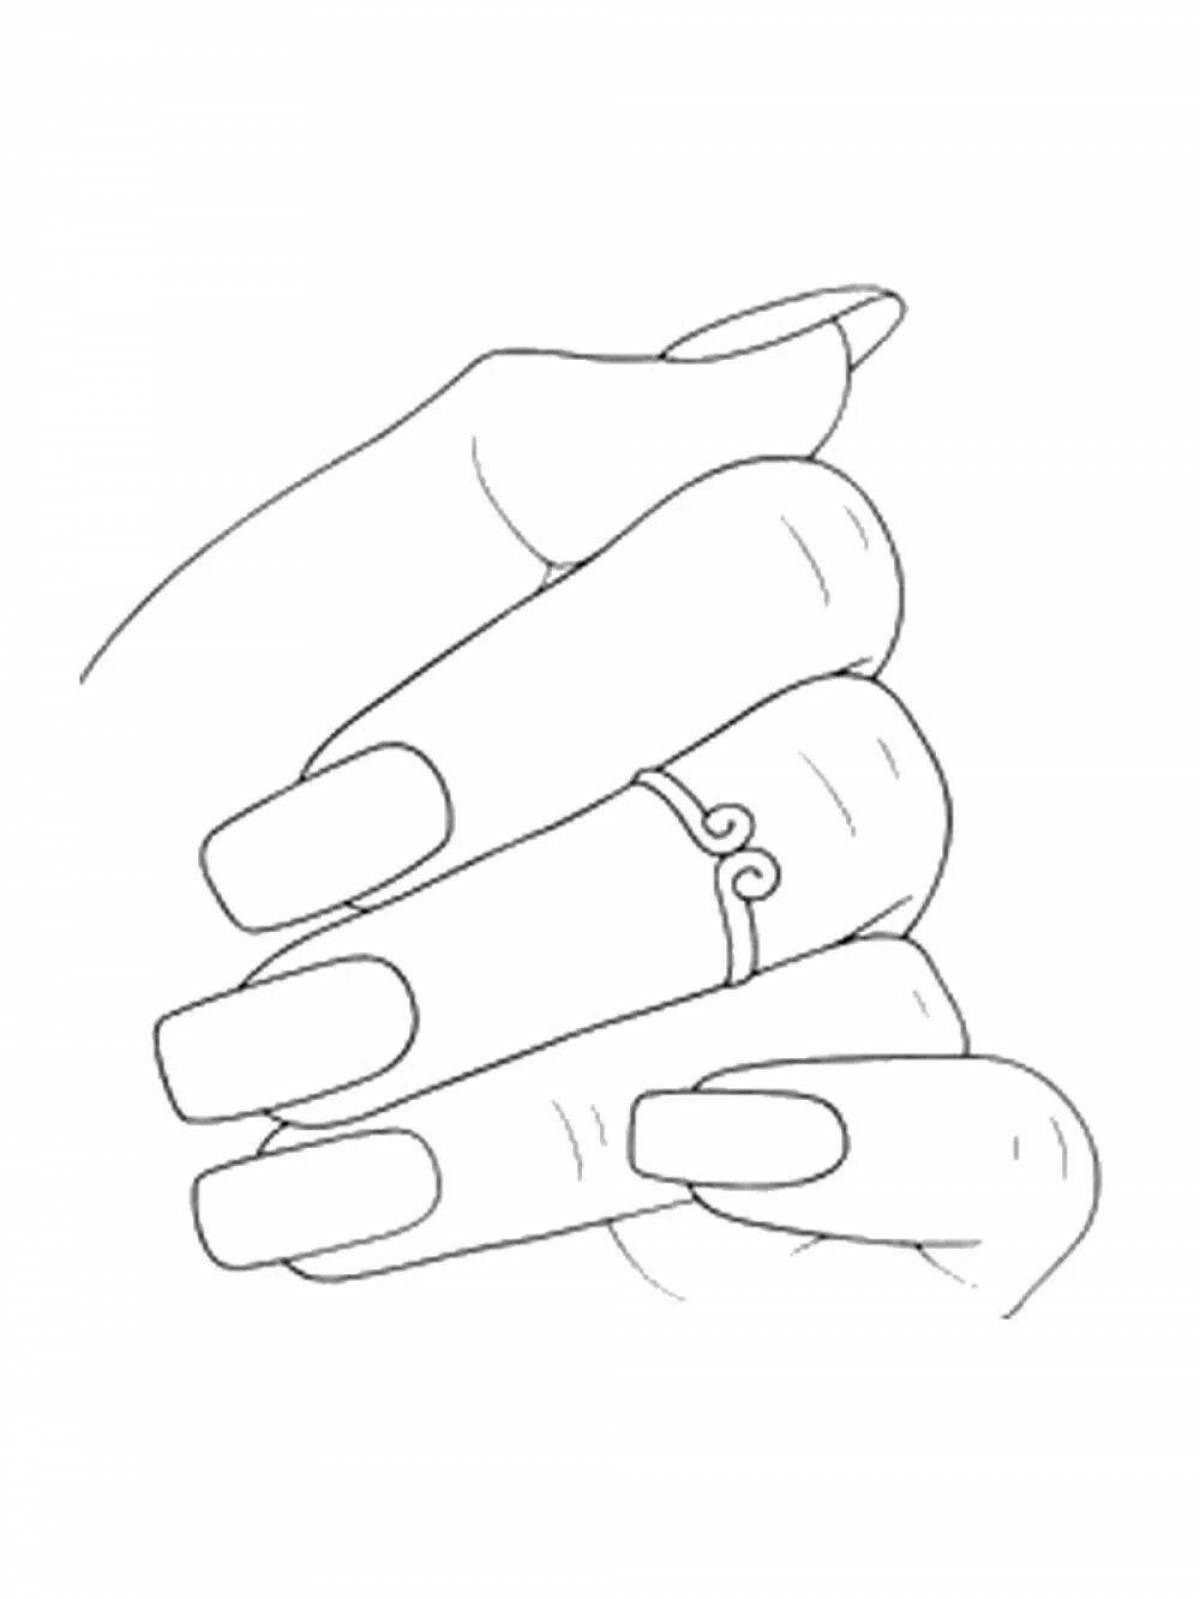 Fashion manicure coloring page